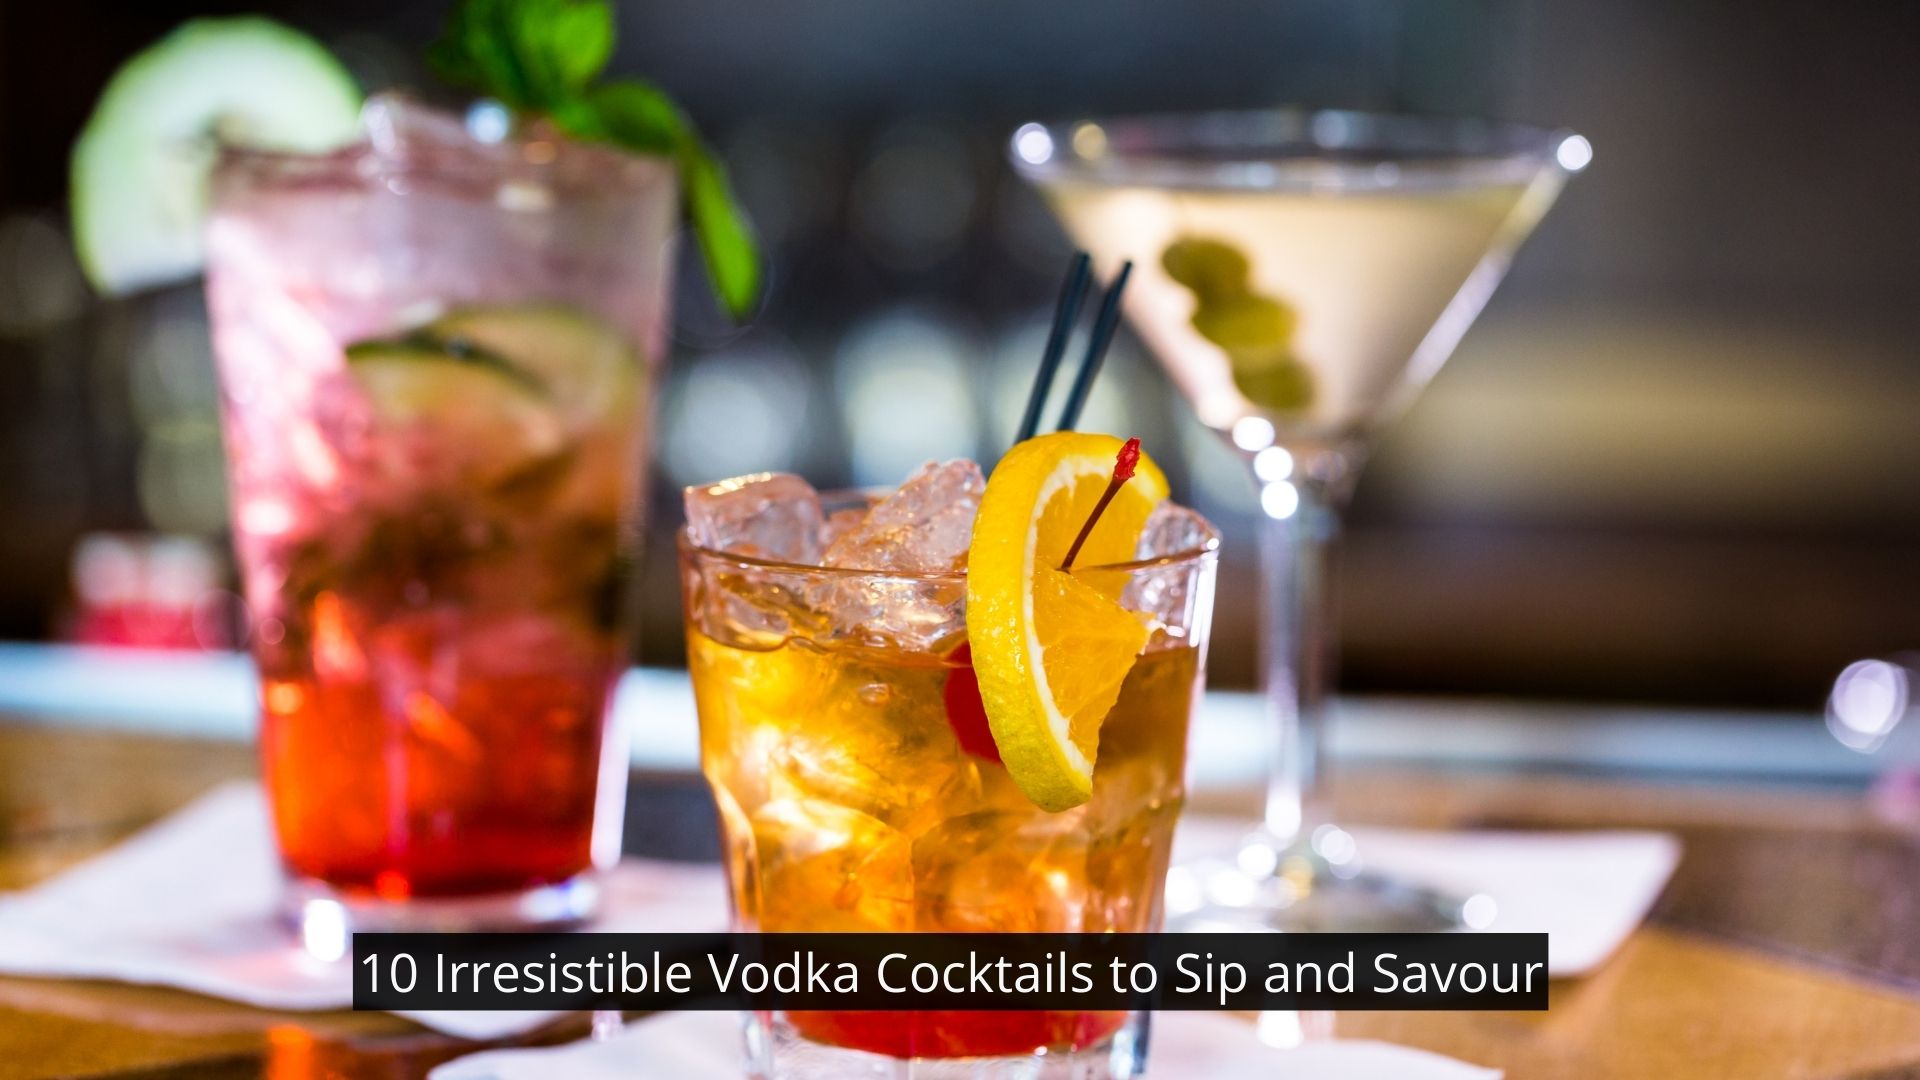 10 Irresistible Vodka Cocktails to Sip and Savour